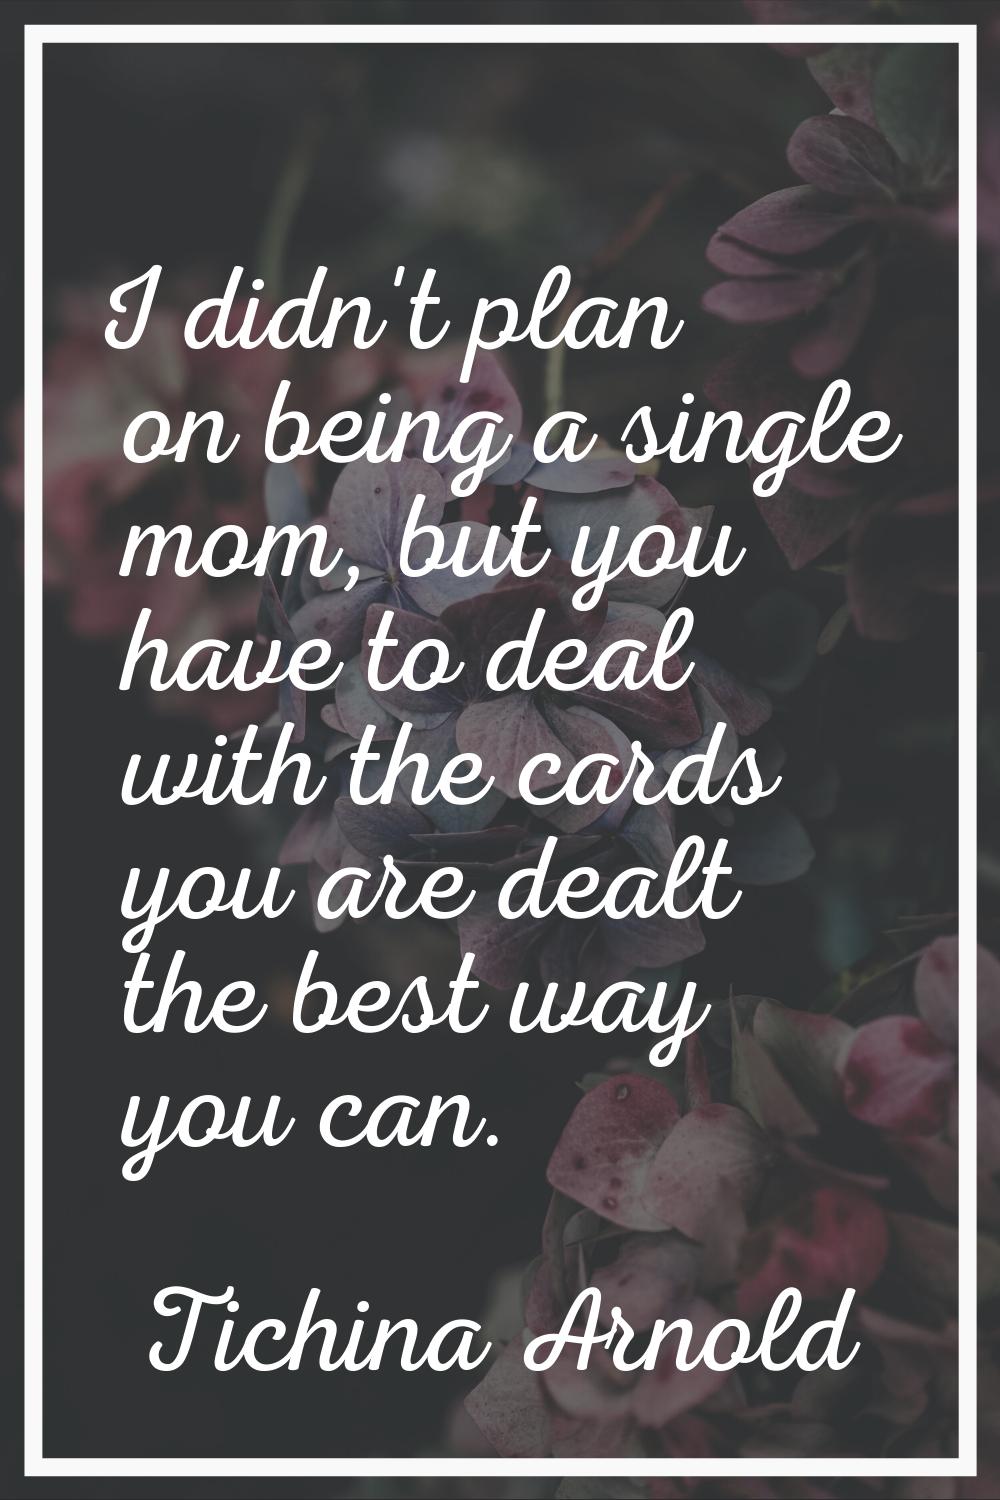 I didn't plan on being a single mom, but you have to deal with the cards you are dealt the best way